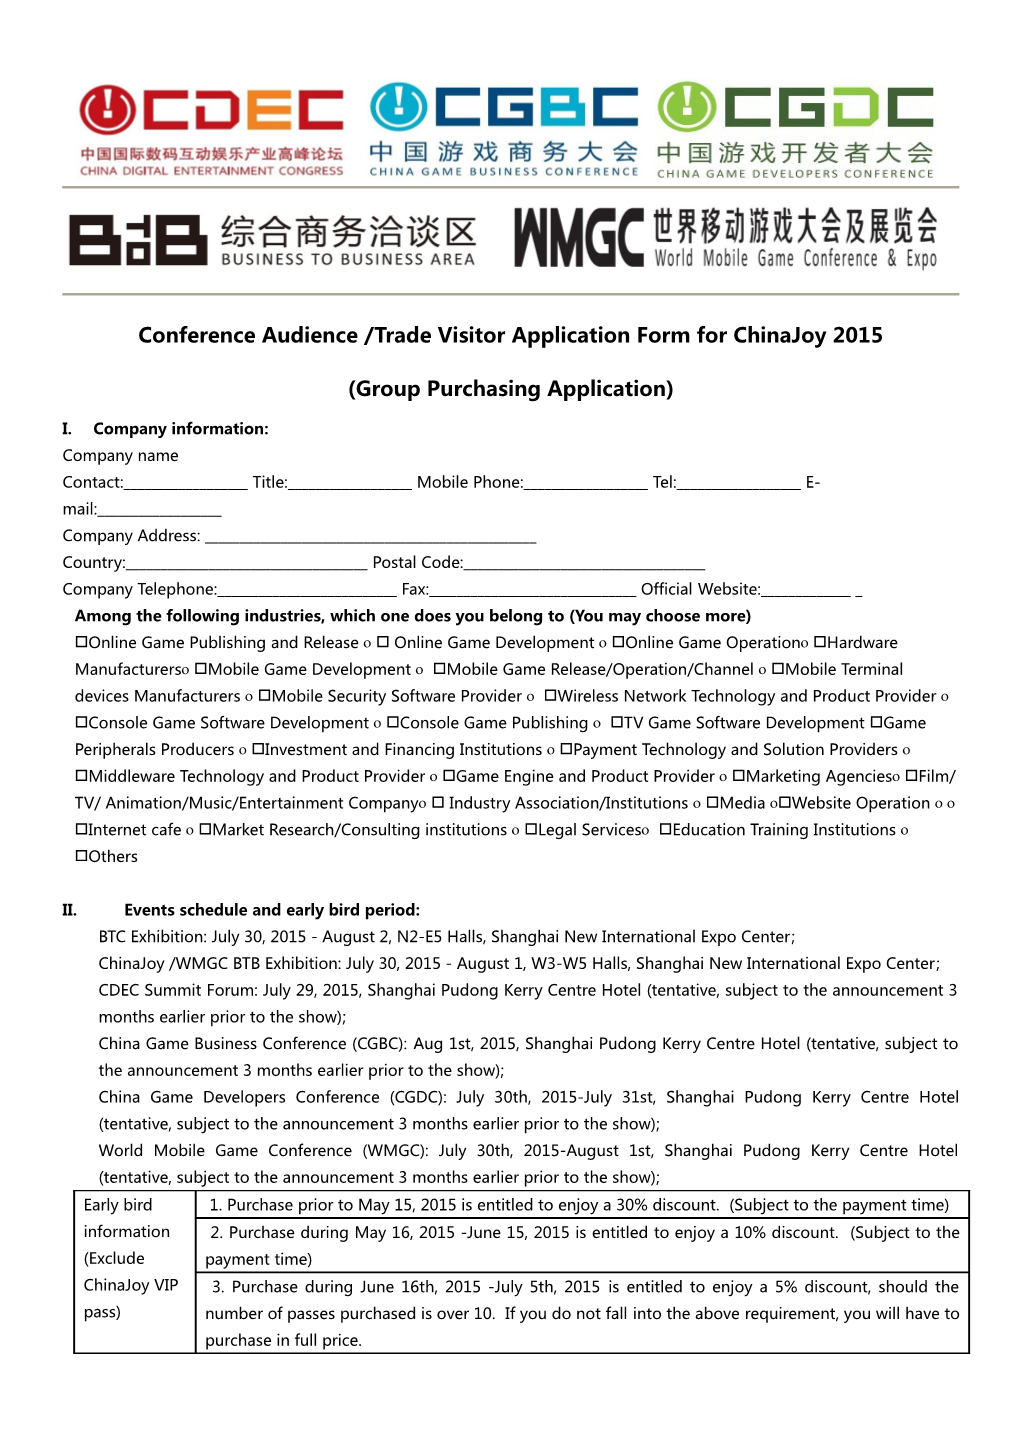 Conference Audience/Trade Visitor Application Form for Chinajoy 2015